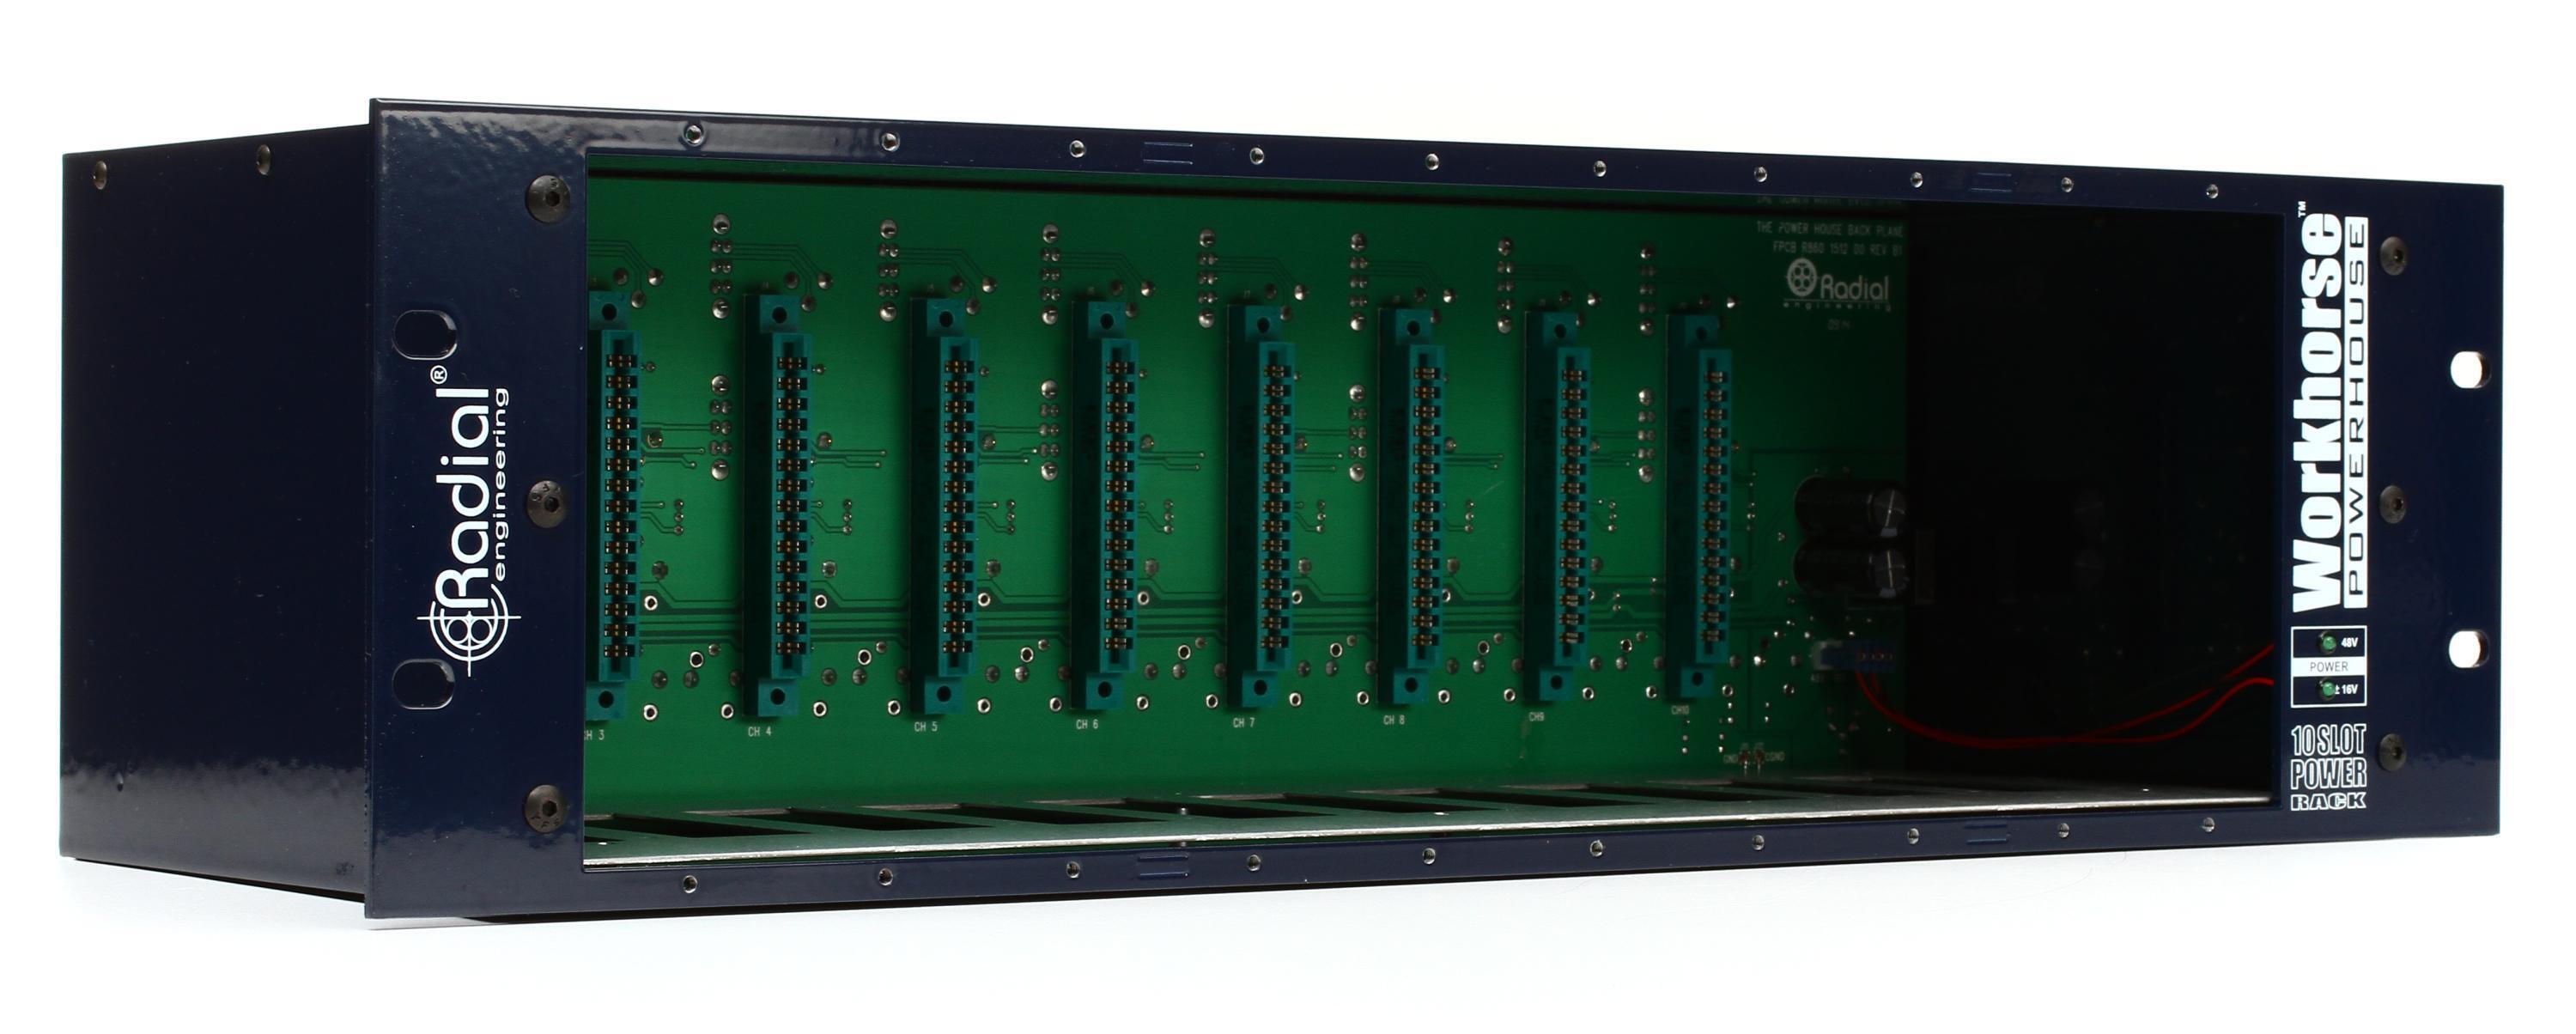 Radial Workhorse Powerhouse 10-slot 500 Series Chassis